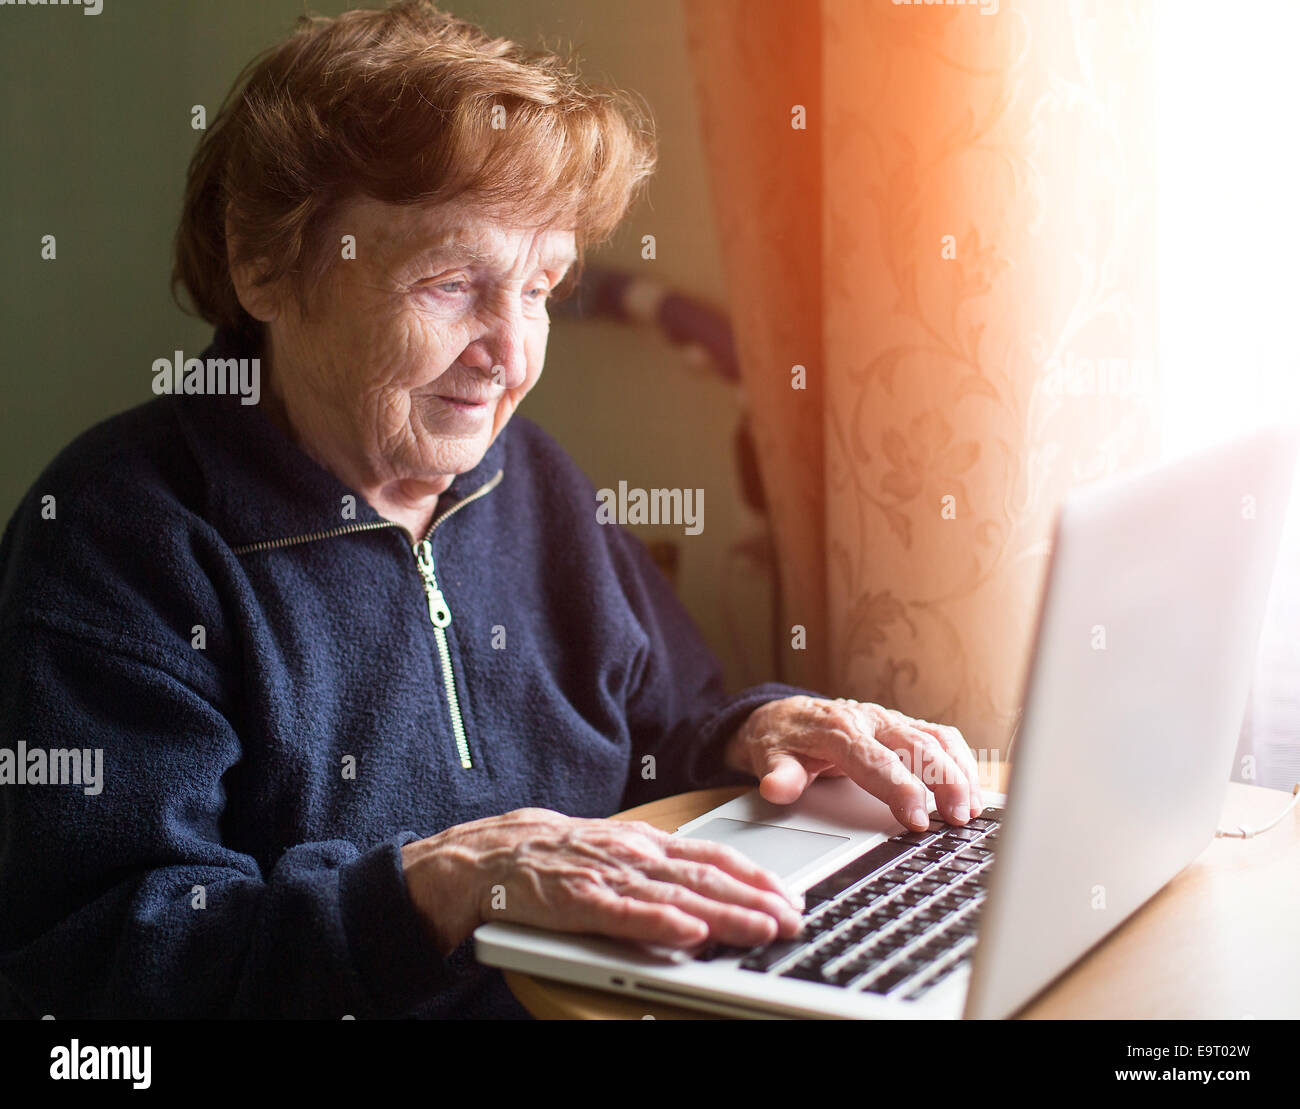 Grandmother near the window works with a laptop. Stock Photo